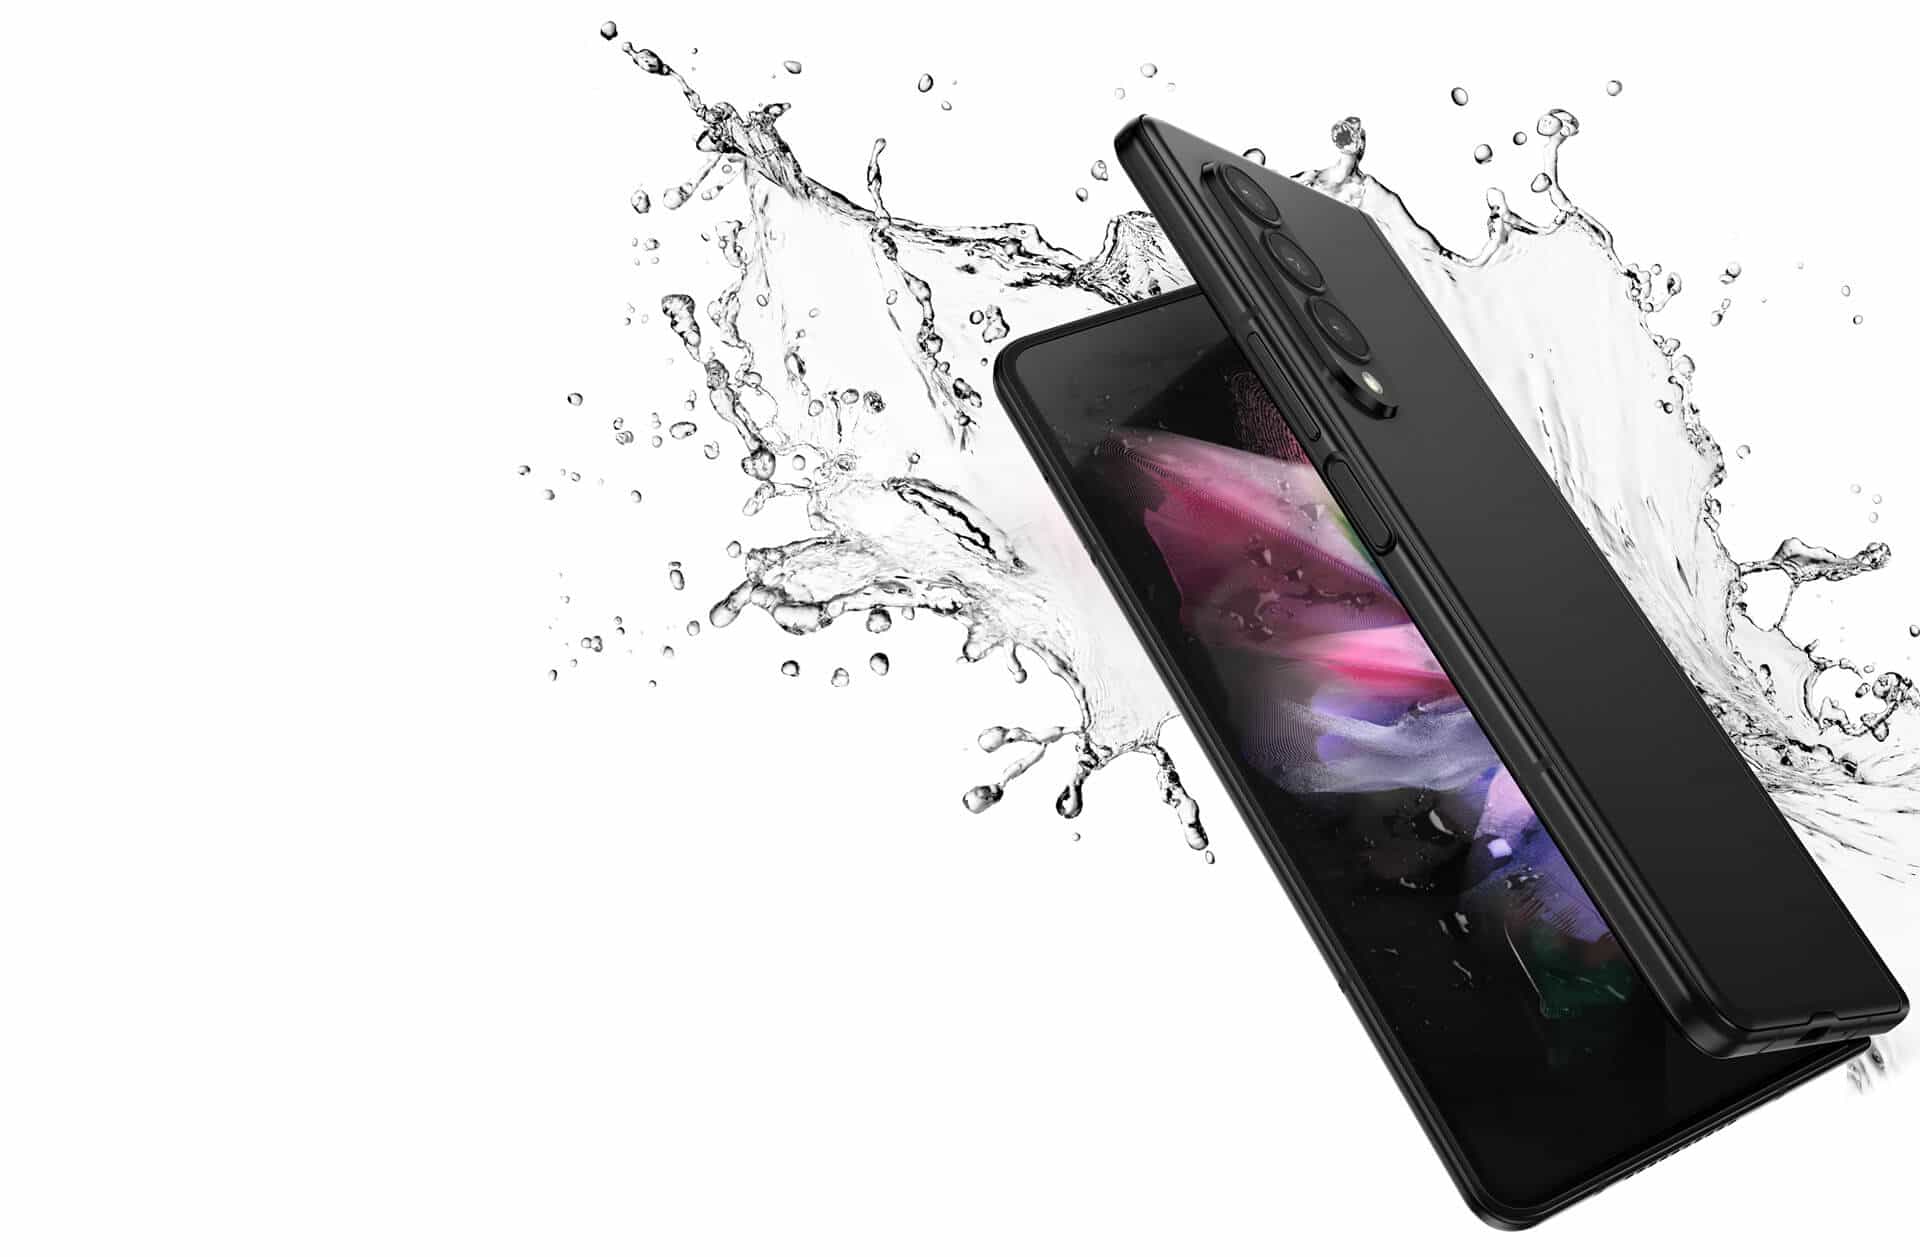 World's first water resistant smartphone, the Galaxy Z Fold 3 makes a splash into advancement.